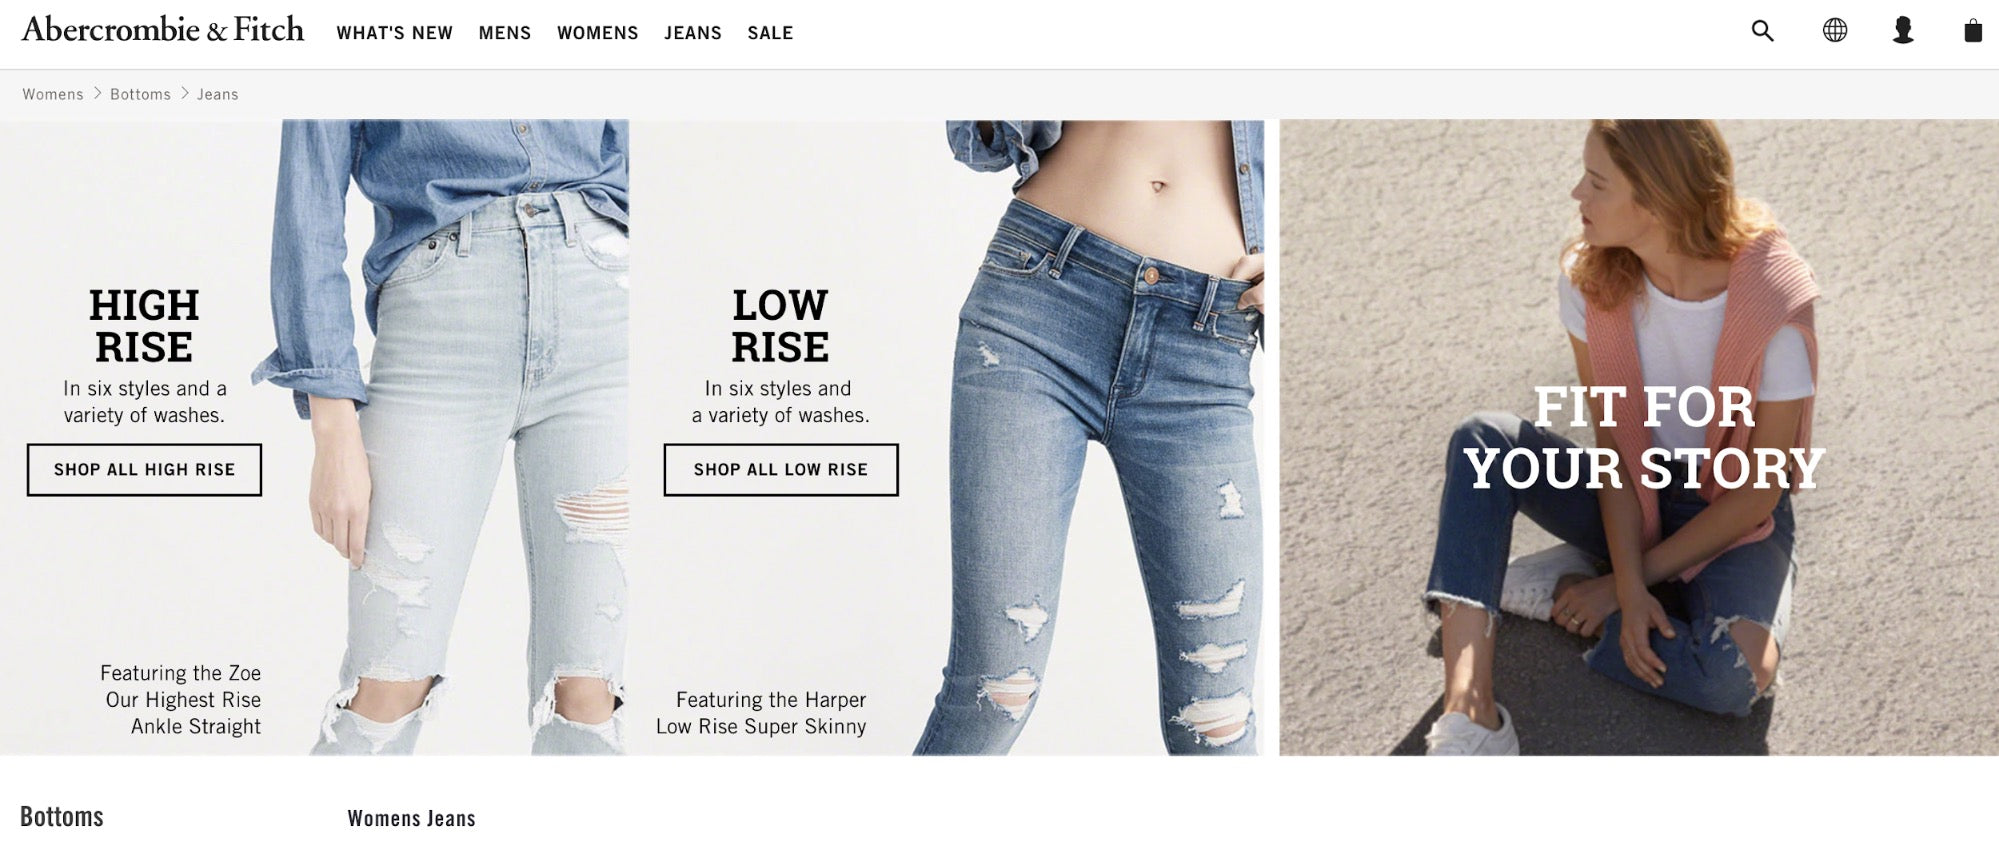 Jeans category landing page example on Abercrombie and Fitch website